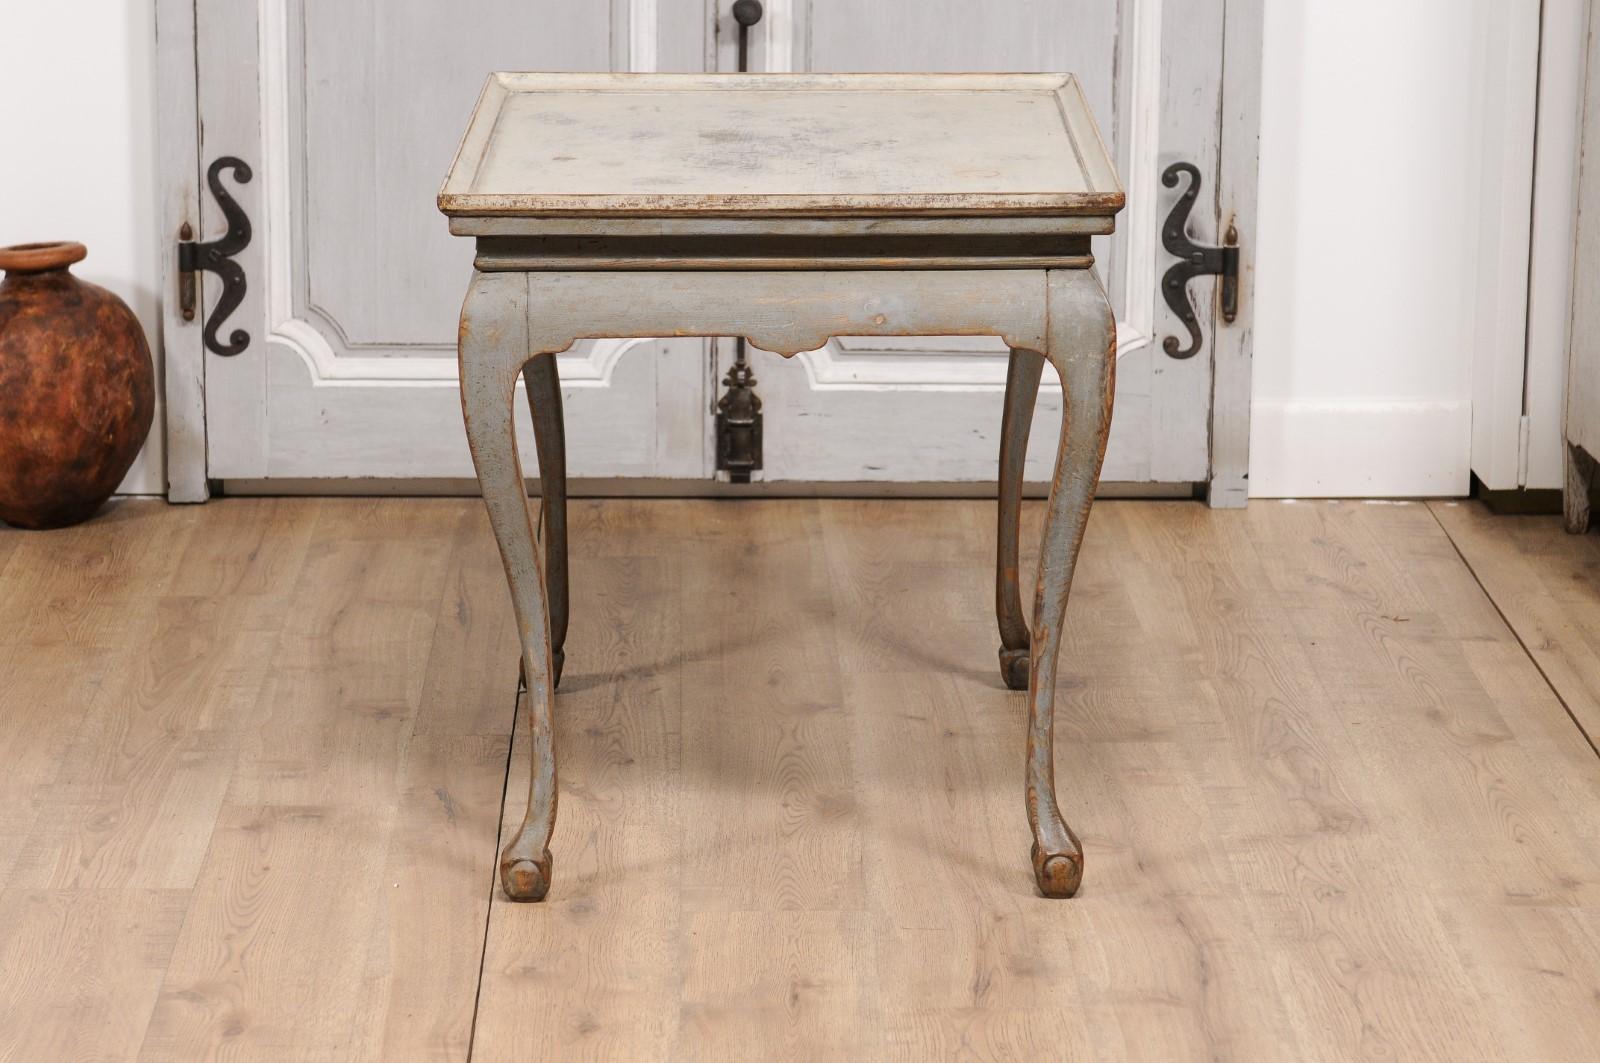 1750s Swedish Rococo Gray Painted Tea Table with Tray Top and Ball and Claw Feet For Sale 7